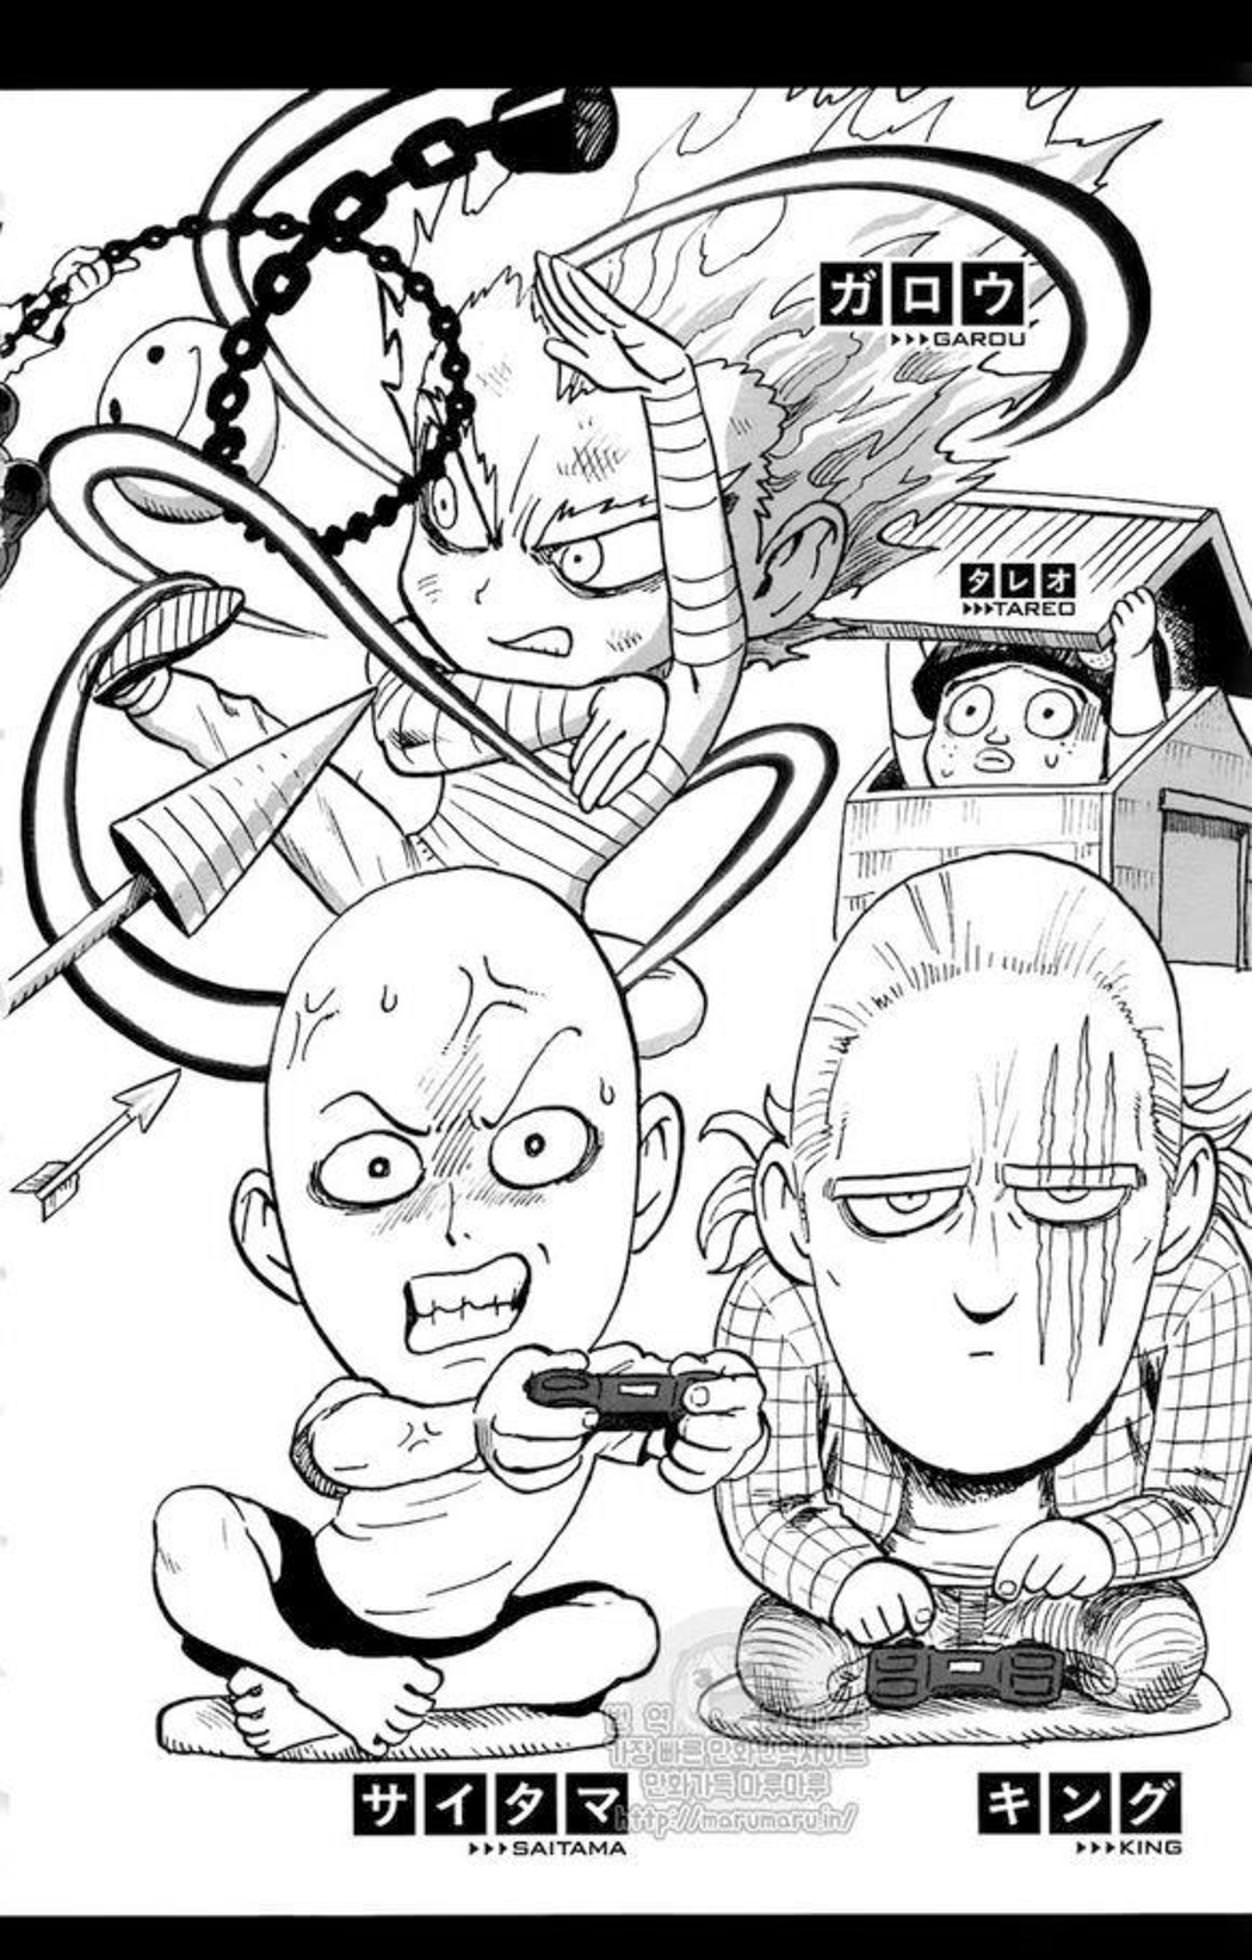 One Punch Man, Chapter 84.1 - Volume 16 Extras image 06